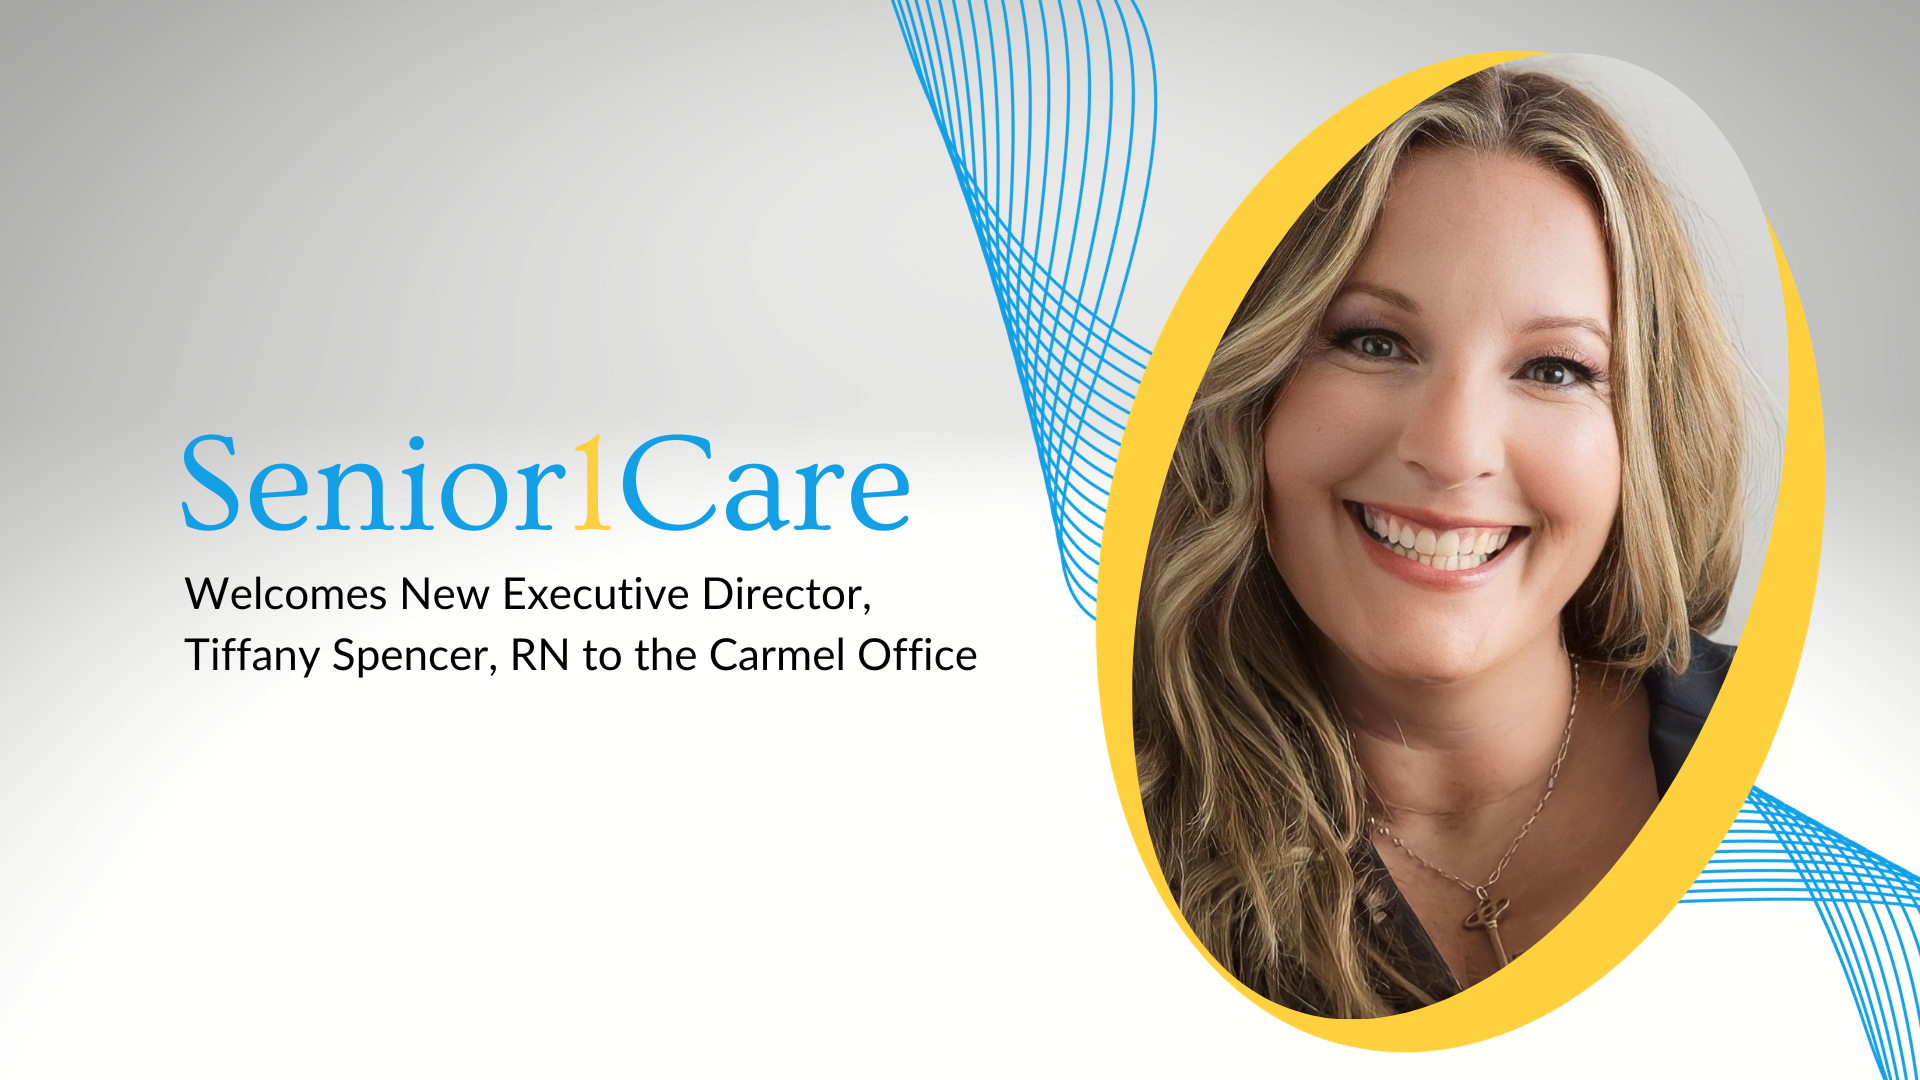 New Executive Director, Tiffany Spencer, RN